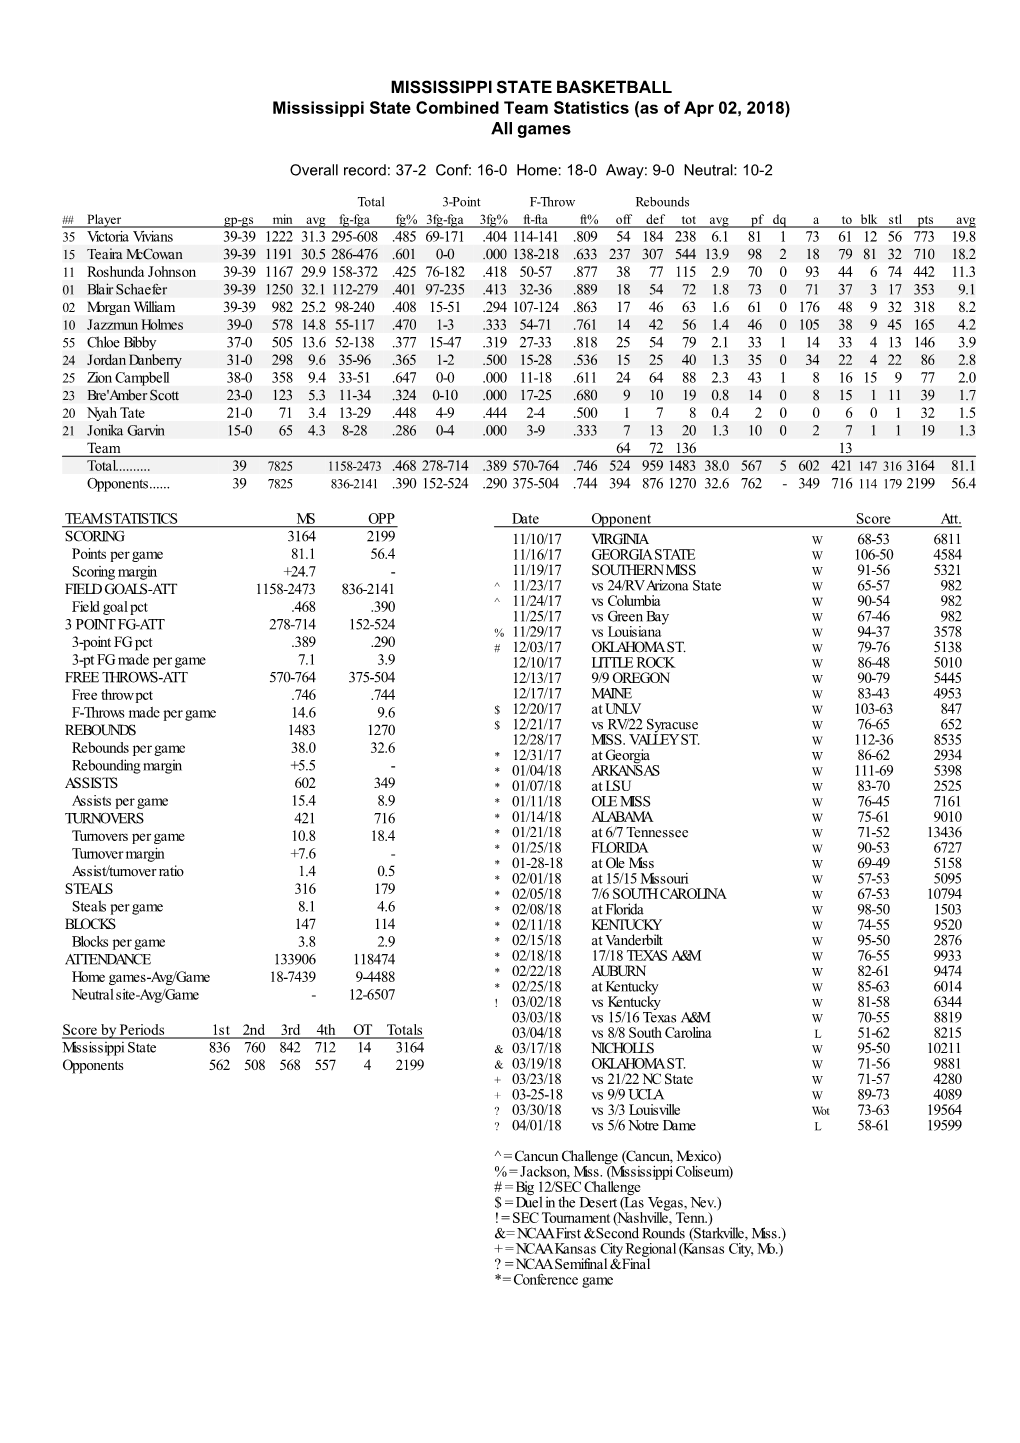 MISSISSIPPI STATE BASKETBALL Mississippi State Combined Team Statistics (As of Apr 02, 2018) All Games